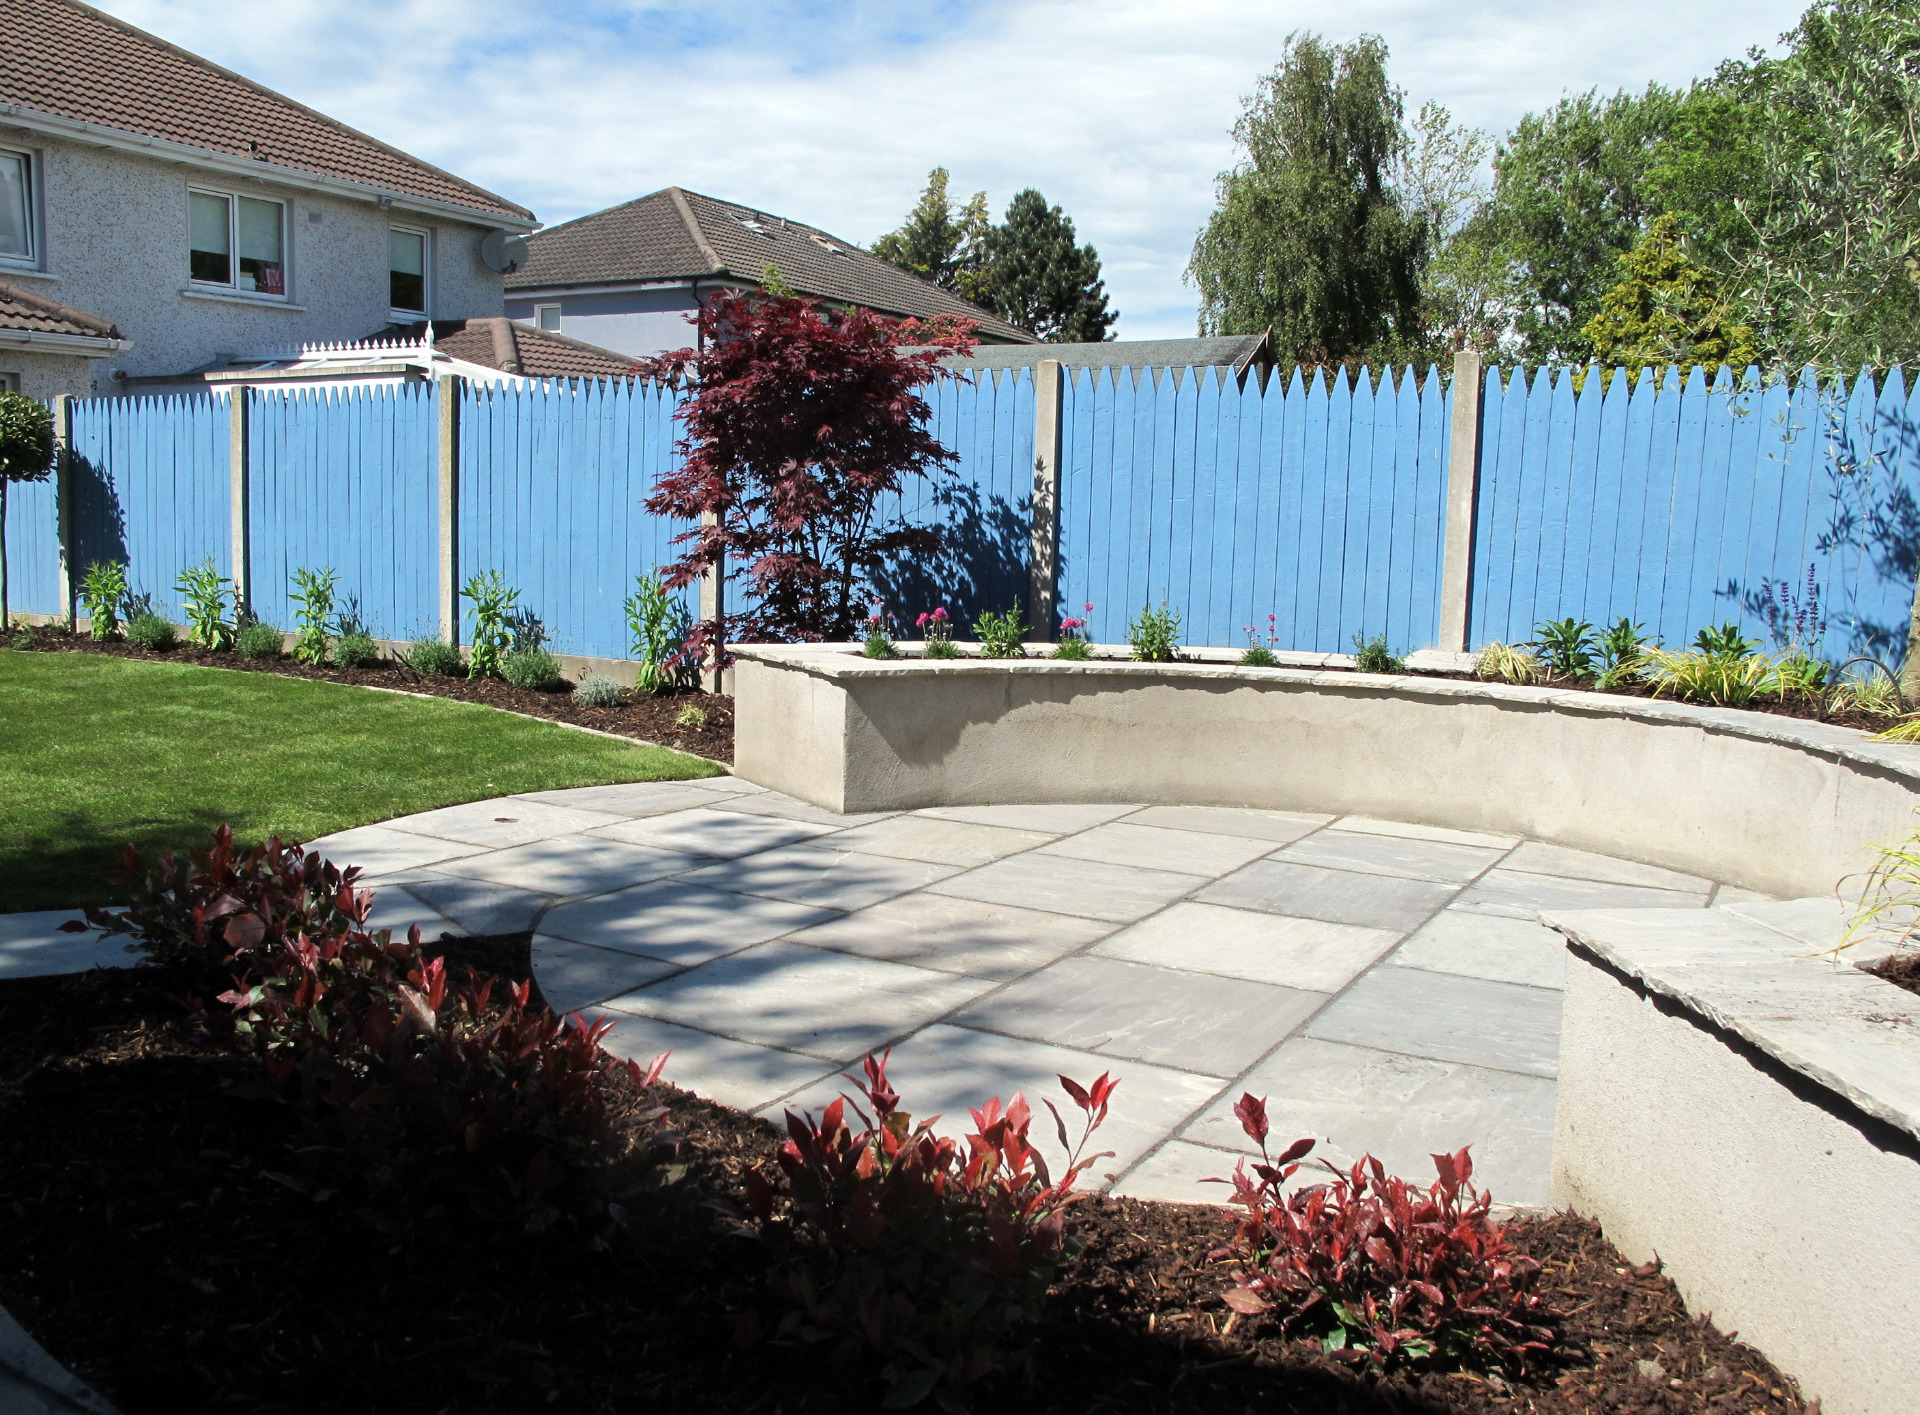 Concentric Family Patio & Raised Planter Bed in Templeogue, Dublin 6W